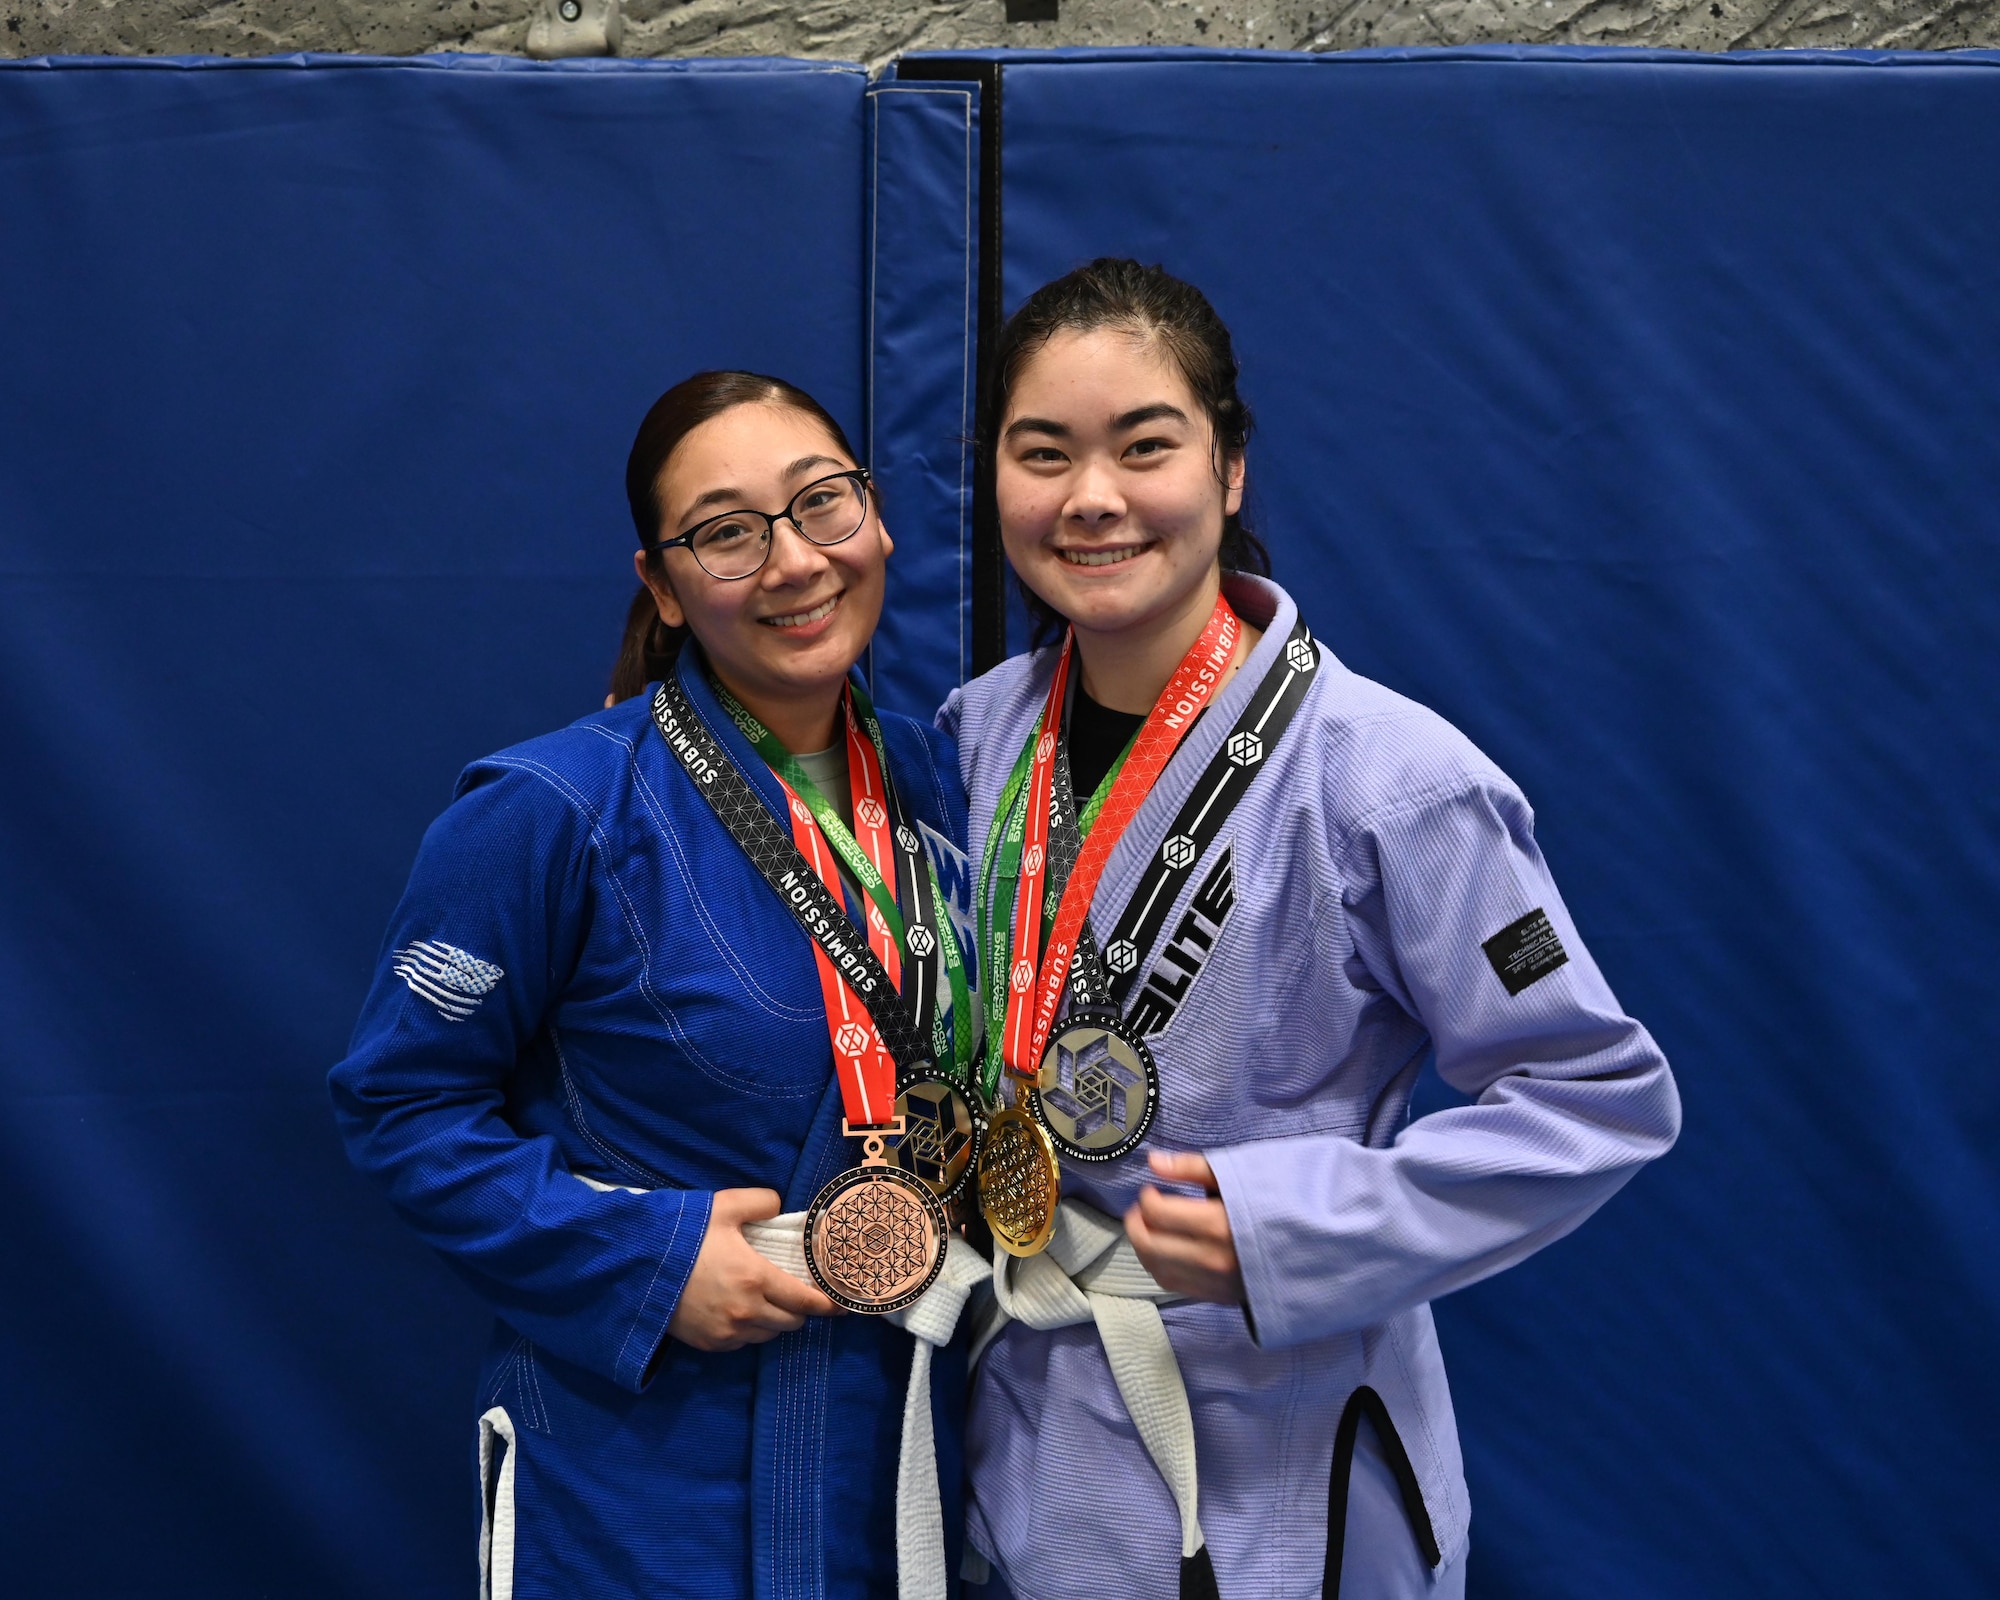 Airman 1st Class Rachel Chi, 5th Communications Squadron communications security accountant, and Airman 1st Class Keoliani Tran, 5th Bomb Wing Chapel Corps religious affairs Airman, pose for a photo with medals they’ve won in Brazilian Jiu Jitsu tournaments at Minot Air Force Base, North Dakota, June 15, 2023. Through Task Force True North’s Warrior program, 115 Team Minot Airmen come together three times weekly to train in Brazilian Jiu Jitsu. (U.S. Air Force photo by Senior Airman Caleb S. Kimmell)